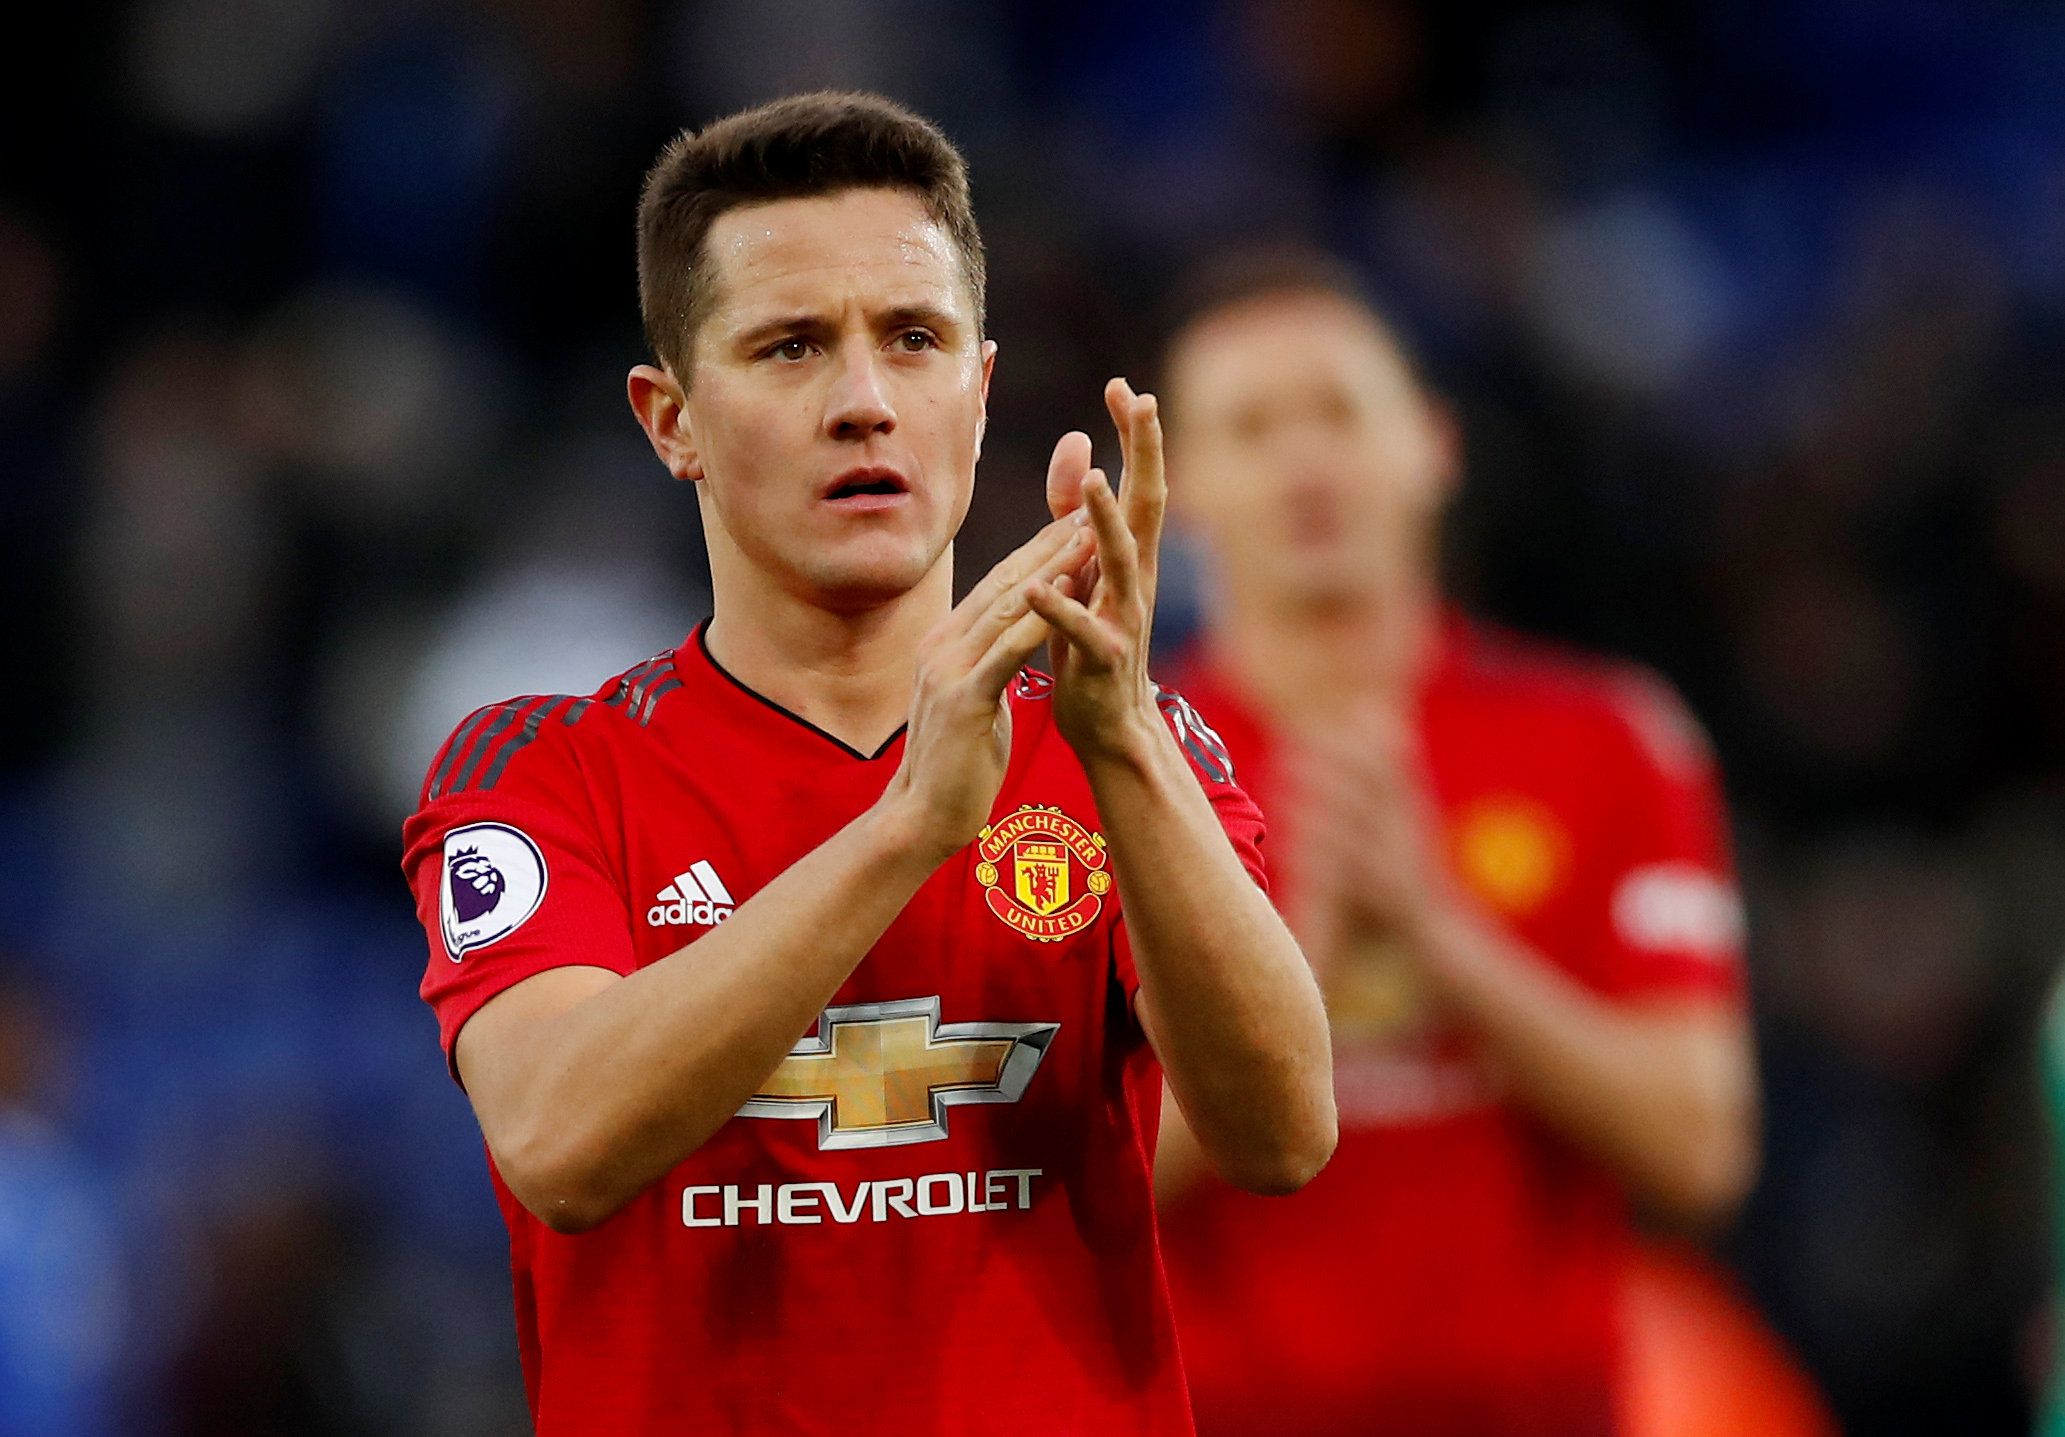 Soccer Football - Premier League - Leicester City v Manchester United - King Power Stadium, Leicester, Britain - February 3, 2019   Manchester United's Ander Herrera celebrates after the match with team mates    Action Images via Reuters/Andrew Boyers    EDITORIAL USE ONLY. No use with unauthorized audio, video, data, fixture lists, club/league logos or "live" services. Online in-match use limited to 75 images, no video emulation. No use in betting, games or single club/league/player publication